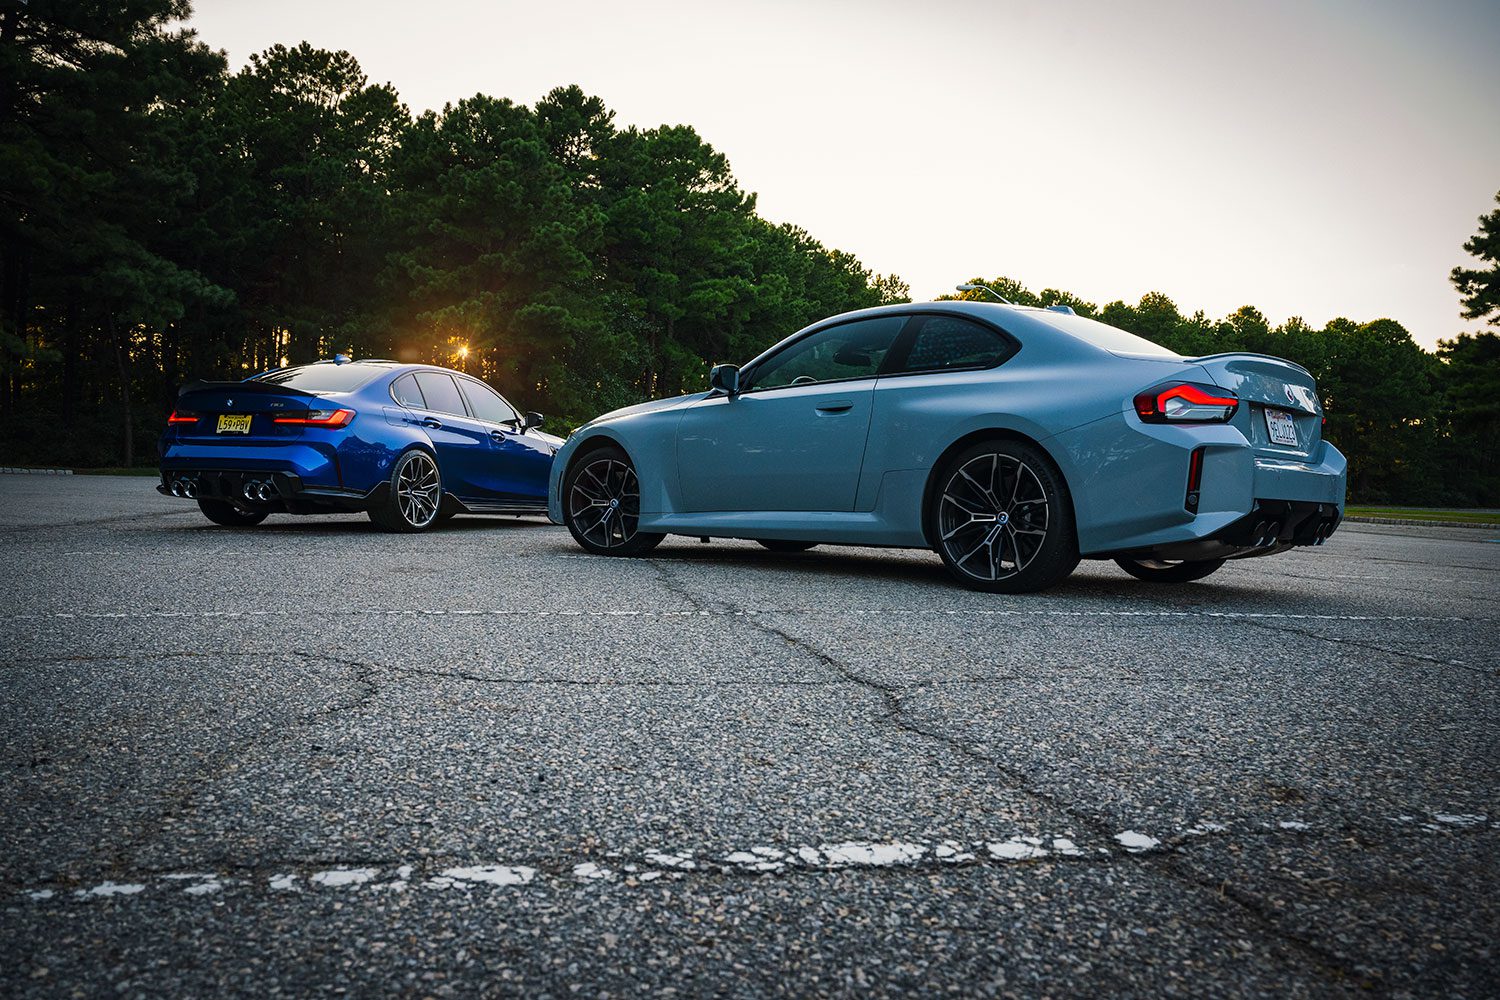 BMW M2 and M3